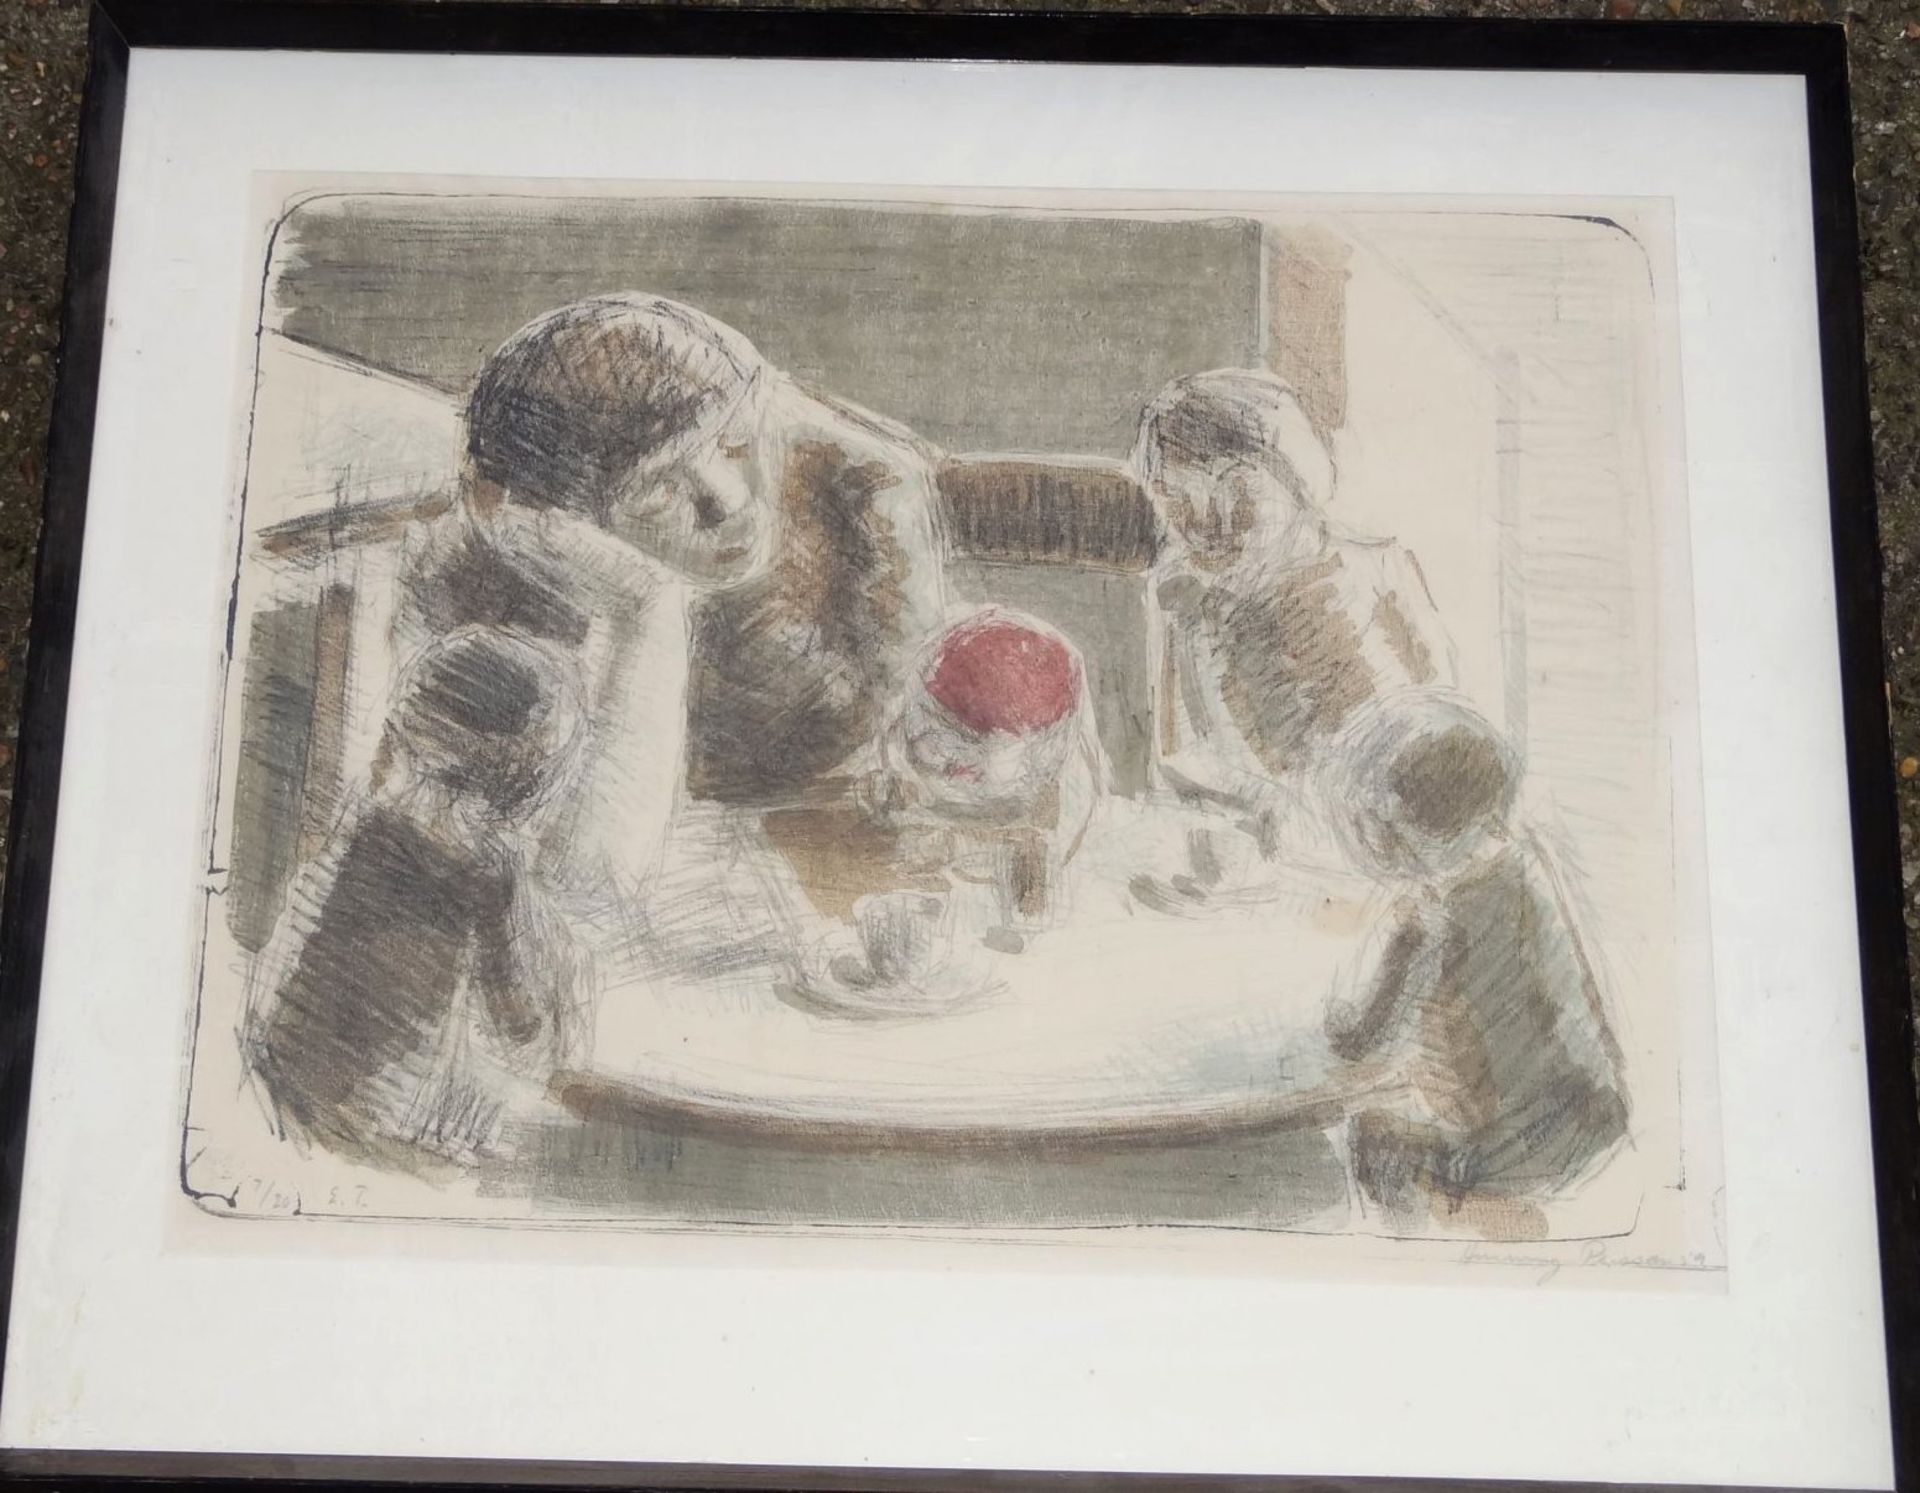 Henning PERSSON (1921-1998) "Familie am Tisch" Farblithografie, E.T. Nr. 3/100/2